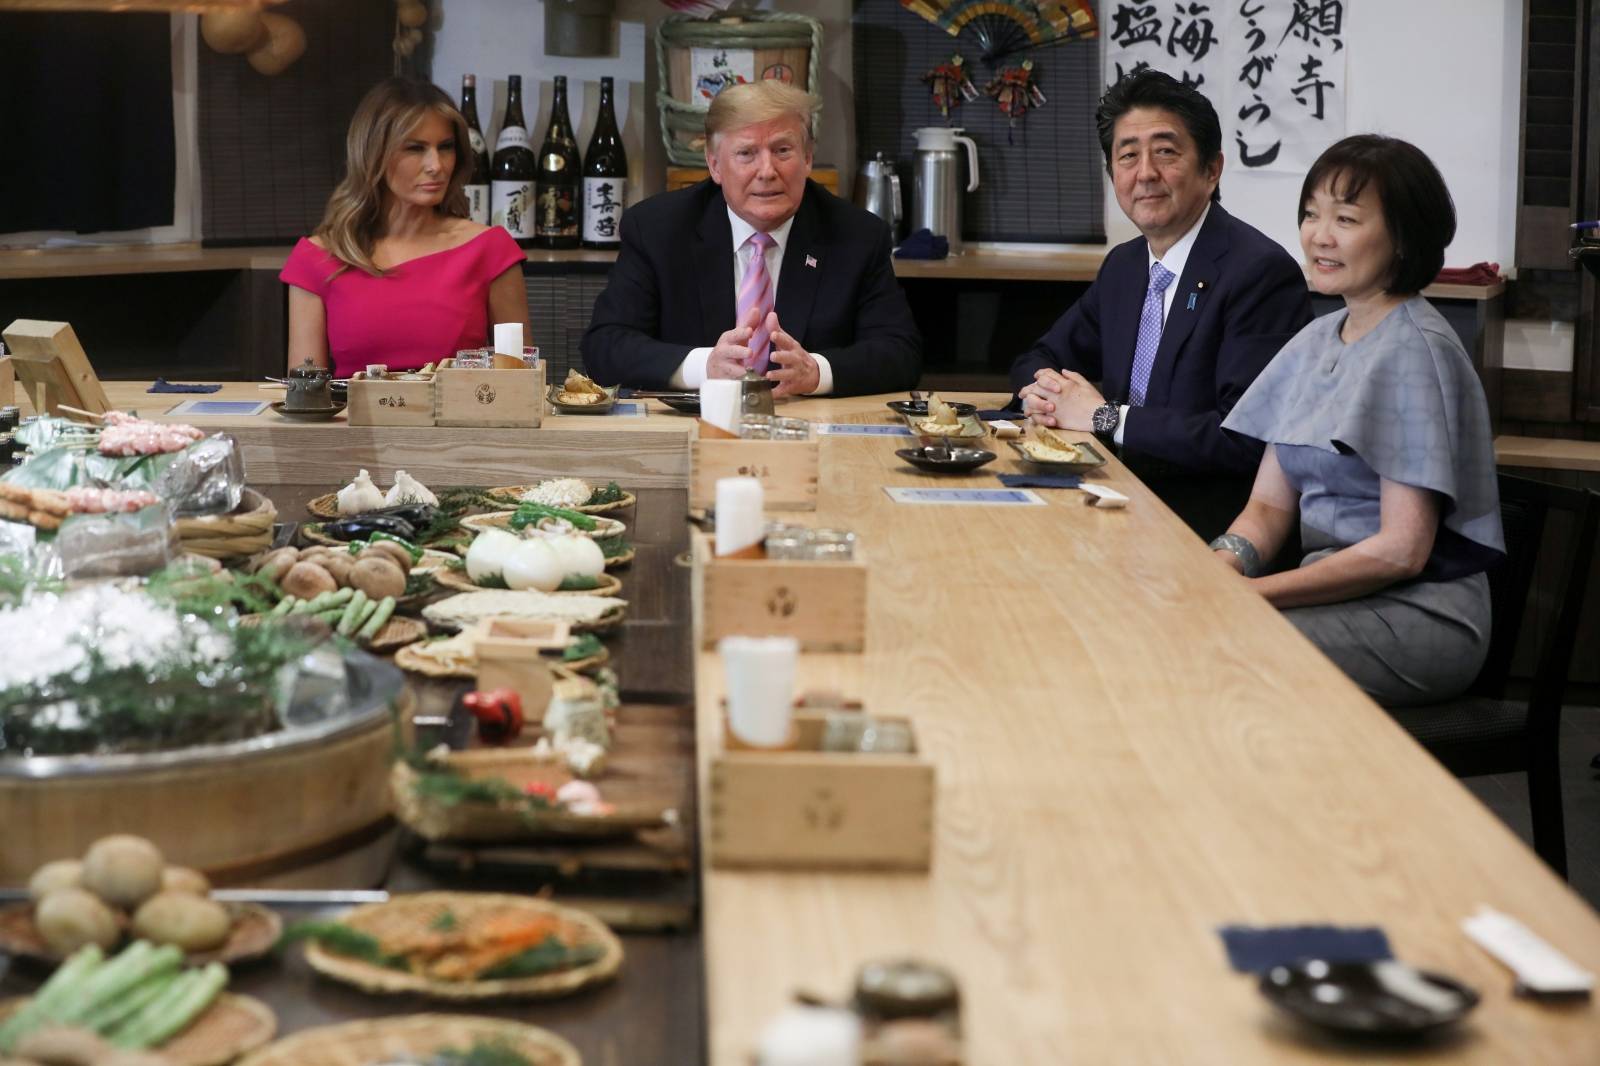 Japanese Prime Minister Abe and his wife sit down with U.S. President Donald Trump and the first lady for a couples dinner in Tokyo